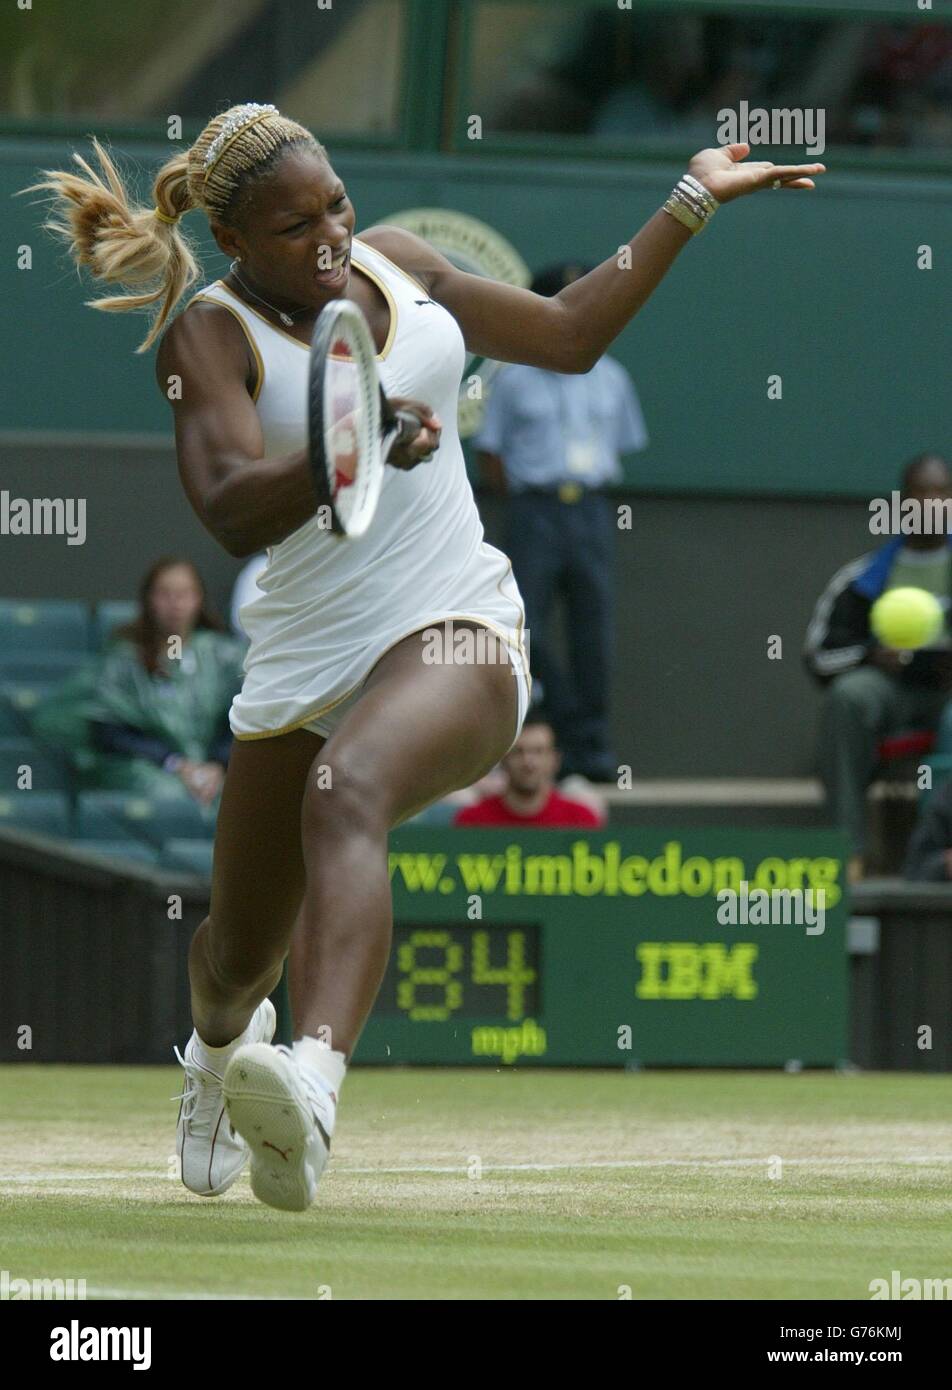 FOR , NO COMMERCIAL USE. Serena Williams from America on her way to winning her match against Chanda Rubin, also from the USA in the fourth round on Centre Court at Wimbledon. Williams won in straight sets 6:3/6:3. Stock Photo